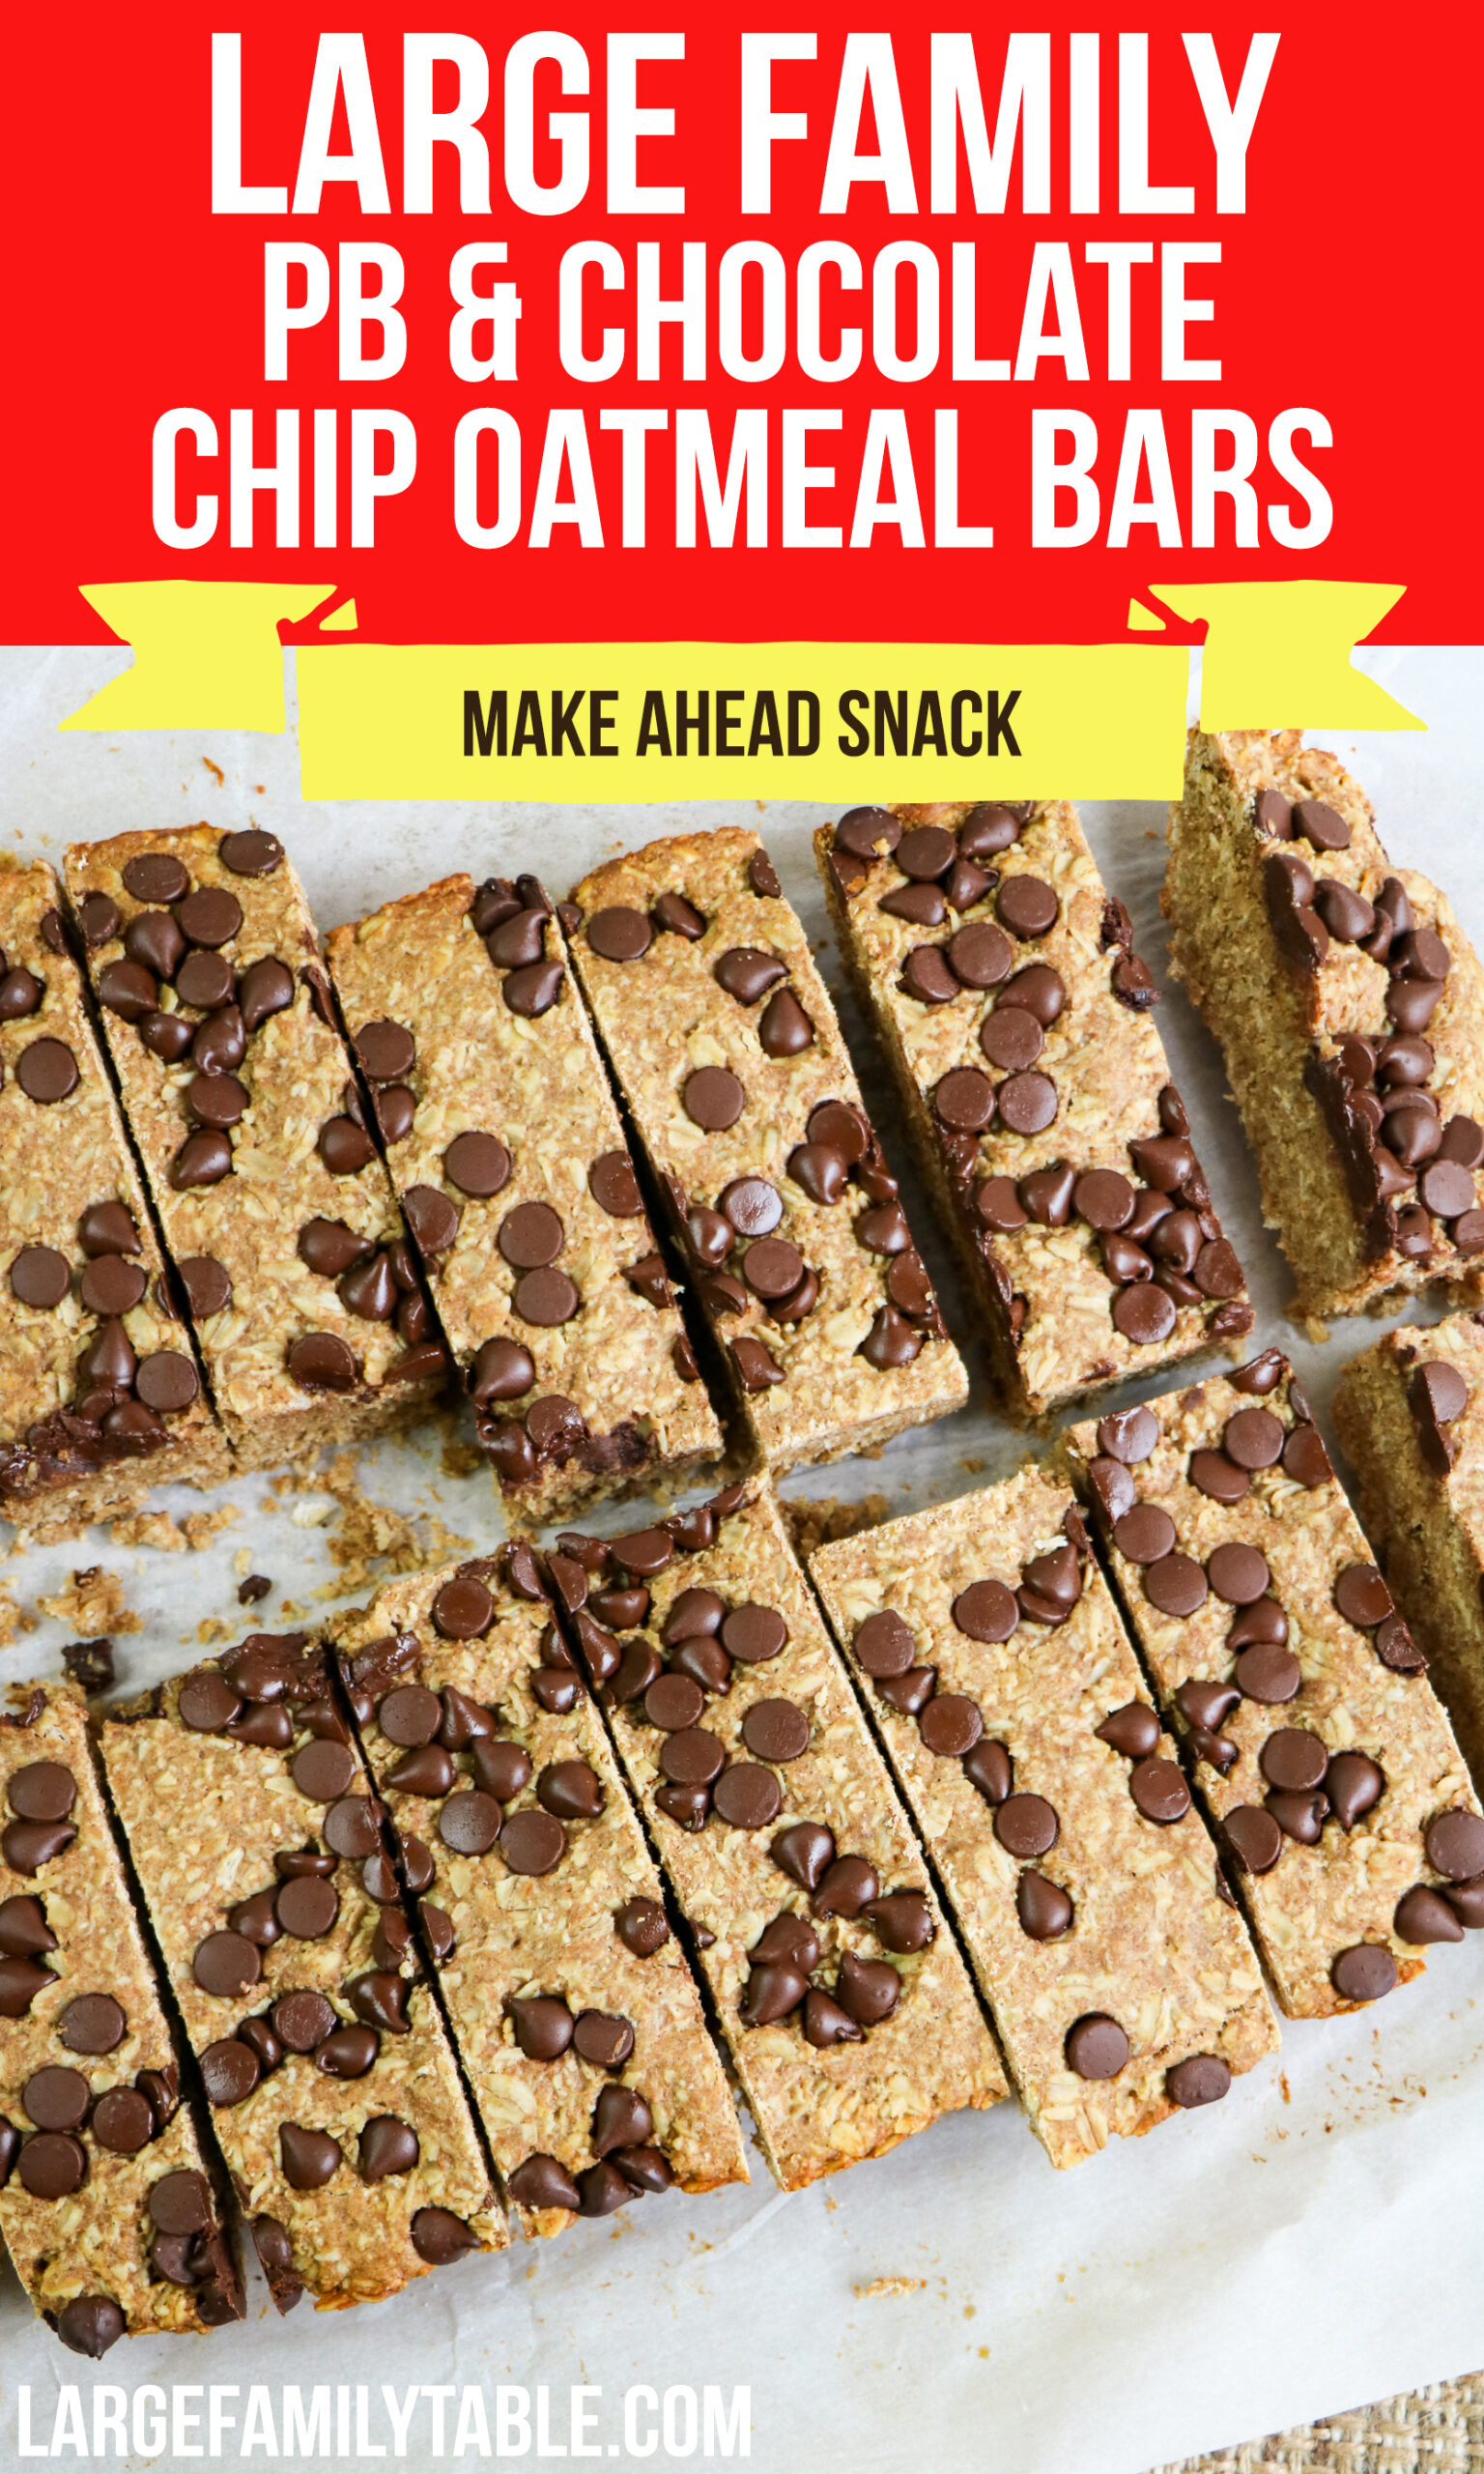 Large-Family-Peanut-Butter-Chocolate-Chip-Oatmeal-Bars